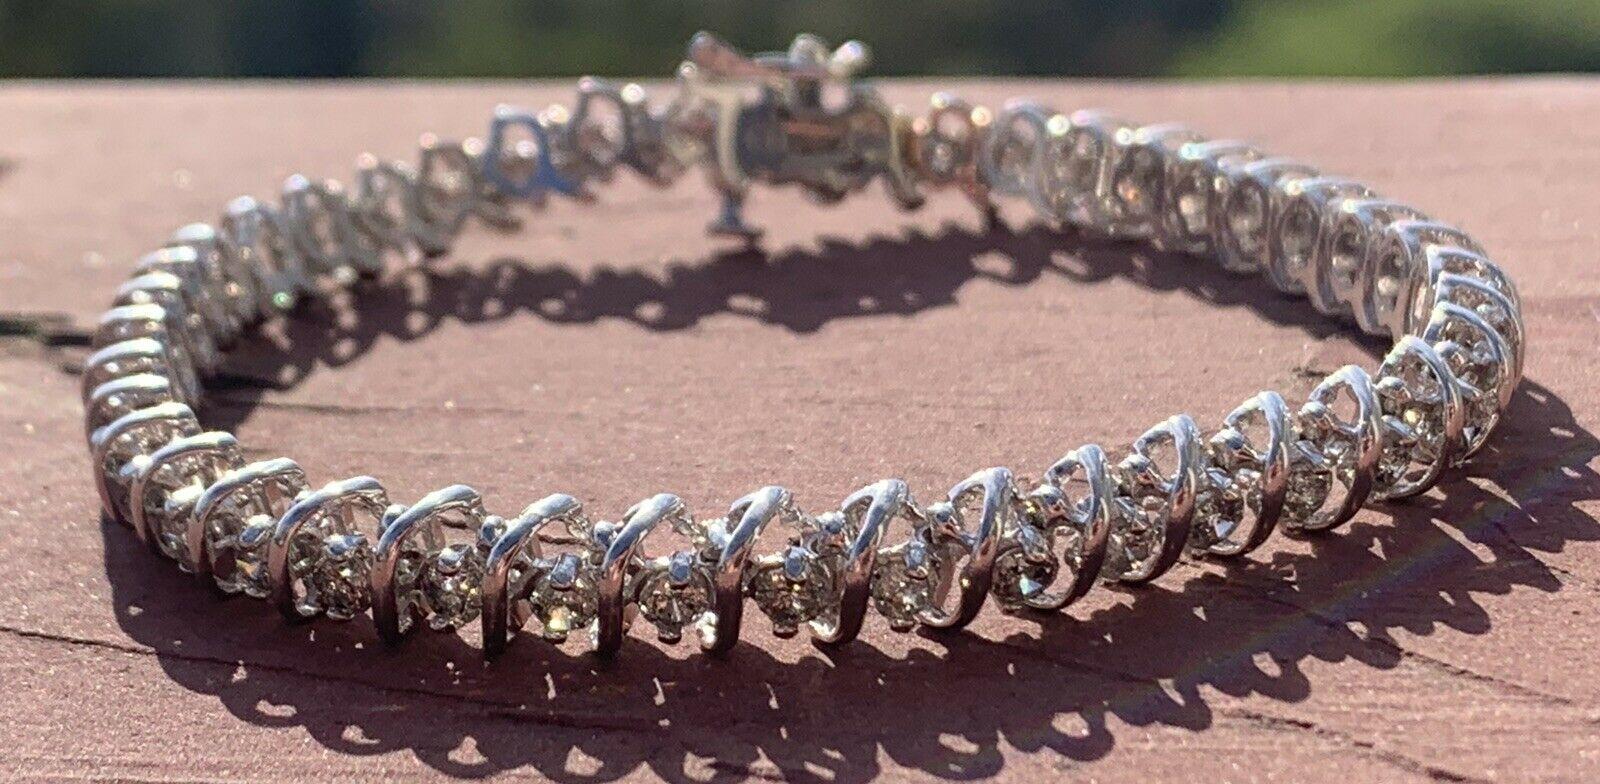 14K White Gold & Diamond Tennis Bracelet 4.75 ctw 15g


For sale is a 14k white gold and diamond tennis bracelet. 
The bracelet is comprised of approx. 4.75 ct of round brilliant cut diamonds L-M in color, I2-I3.
Perfect worn day or night.
Get this